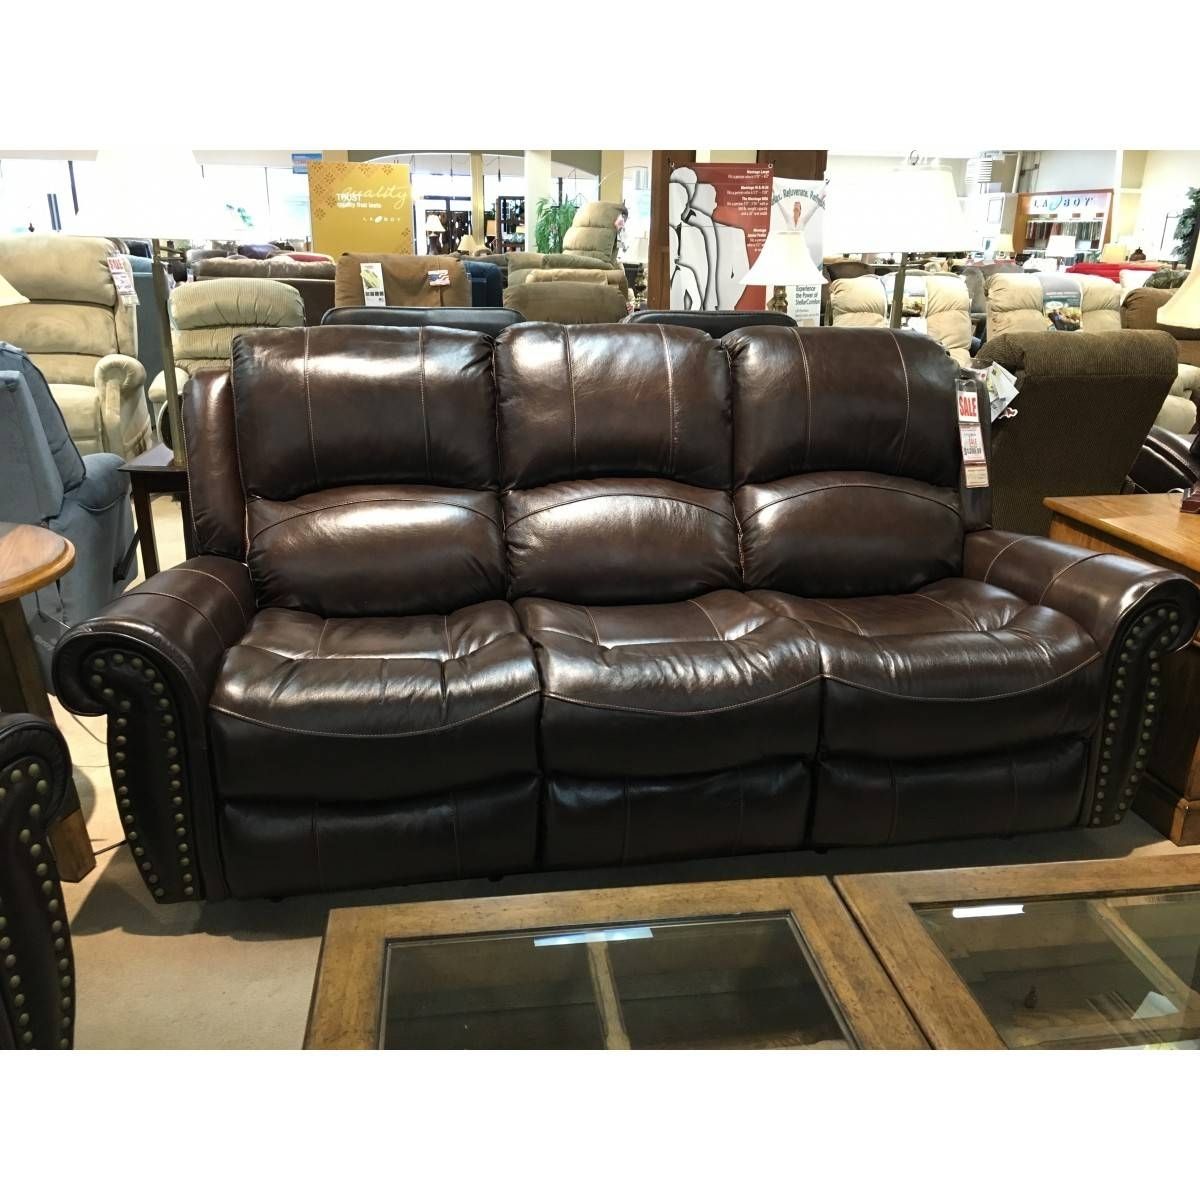 Furniture Italian Leather Power Reclining Sofa Intended For Cheers Recliner Sofas (View 1 of 15)